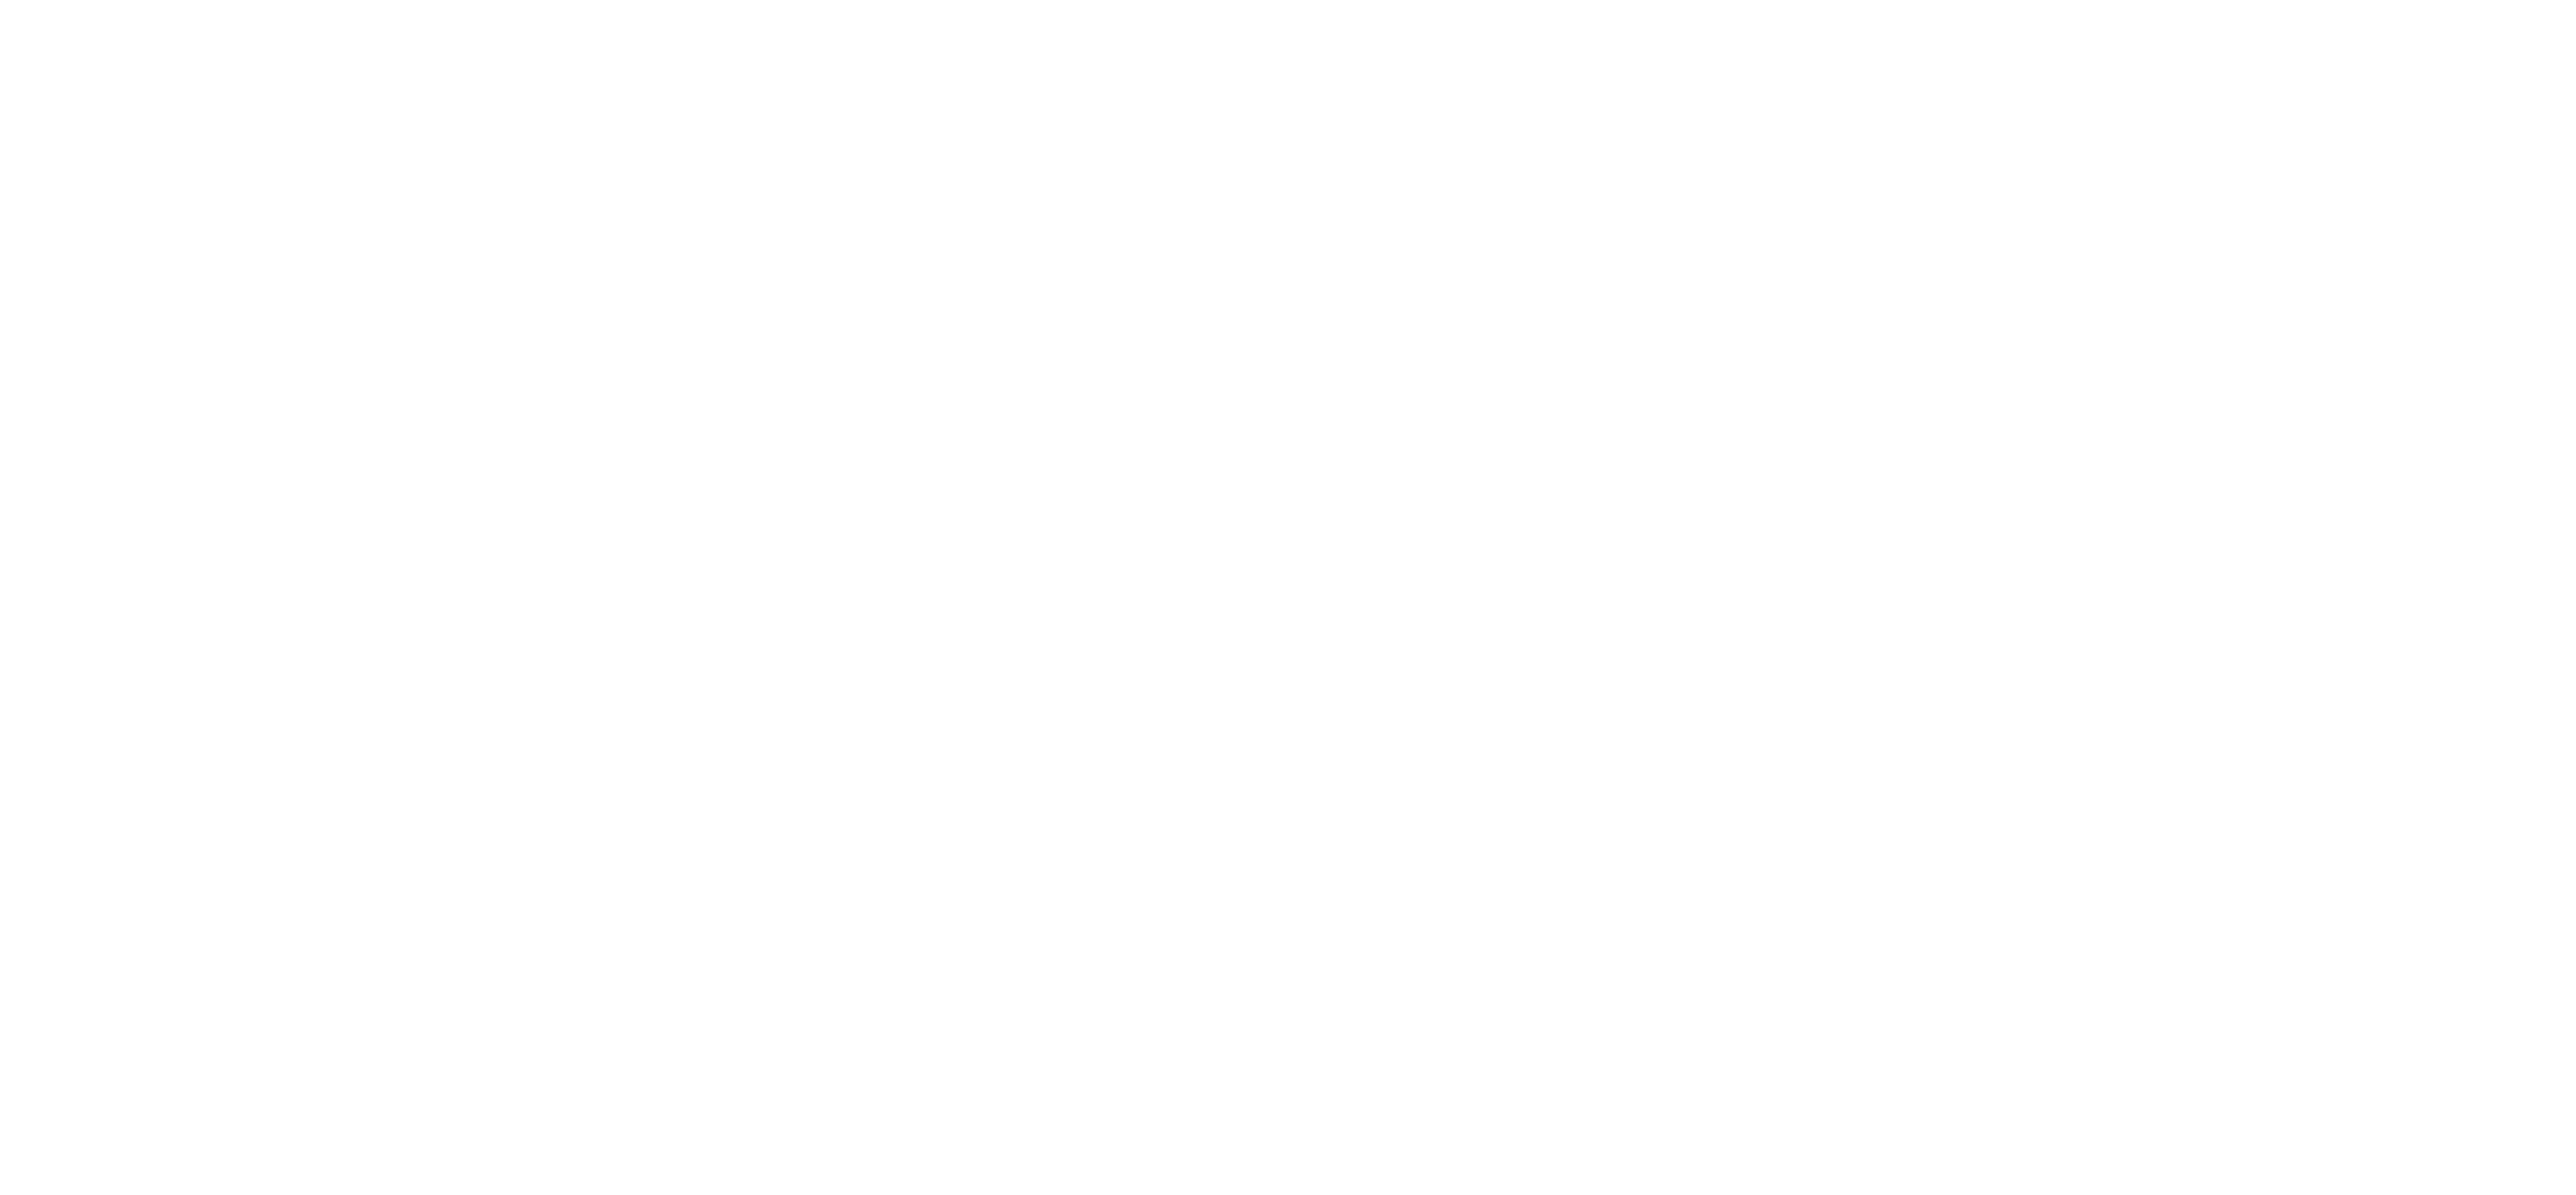 Beautiful Canoe logo in white with transparent background